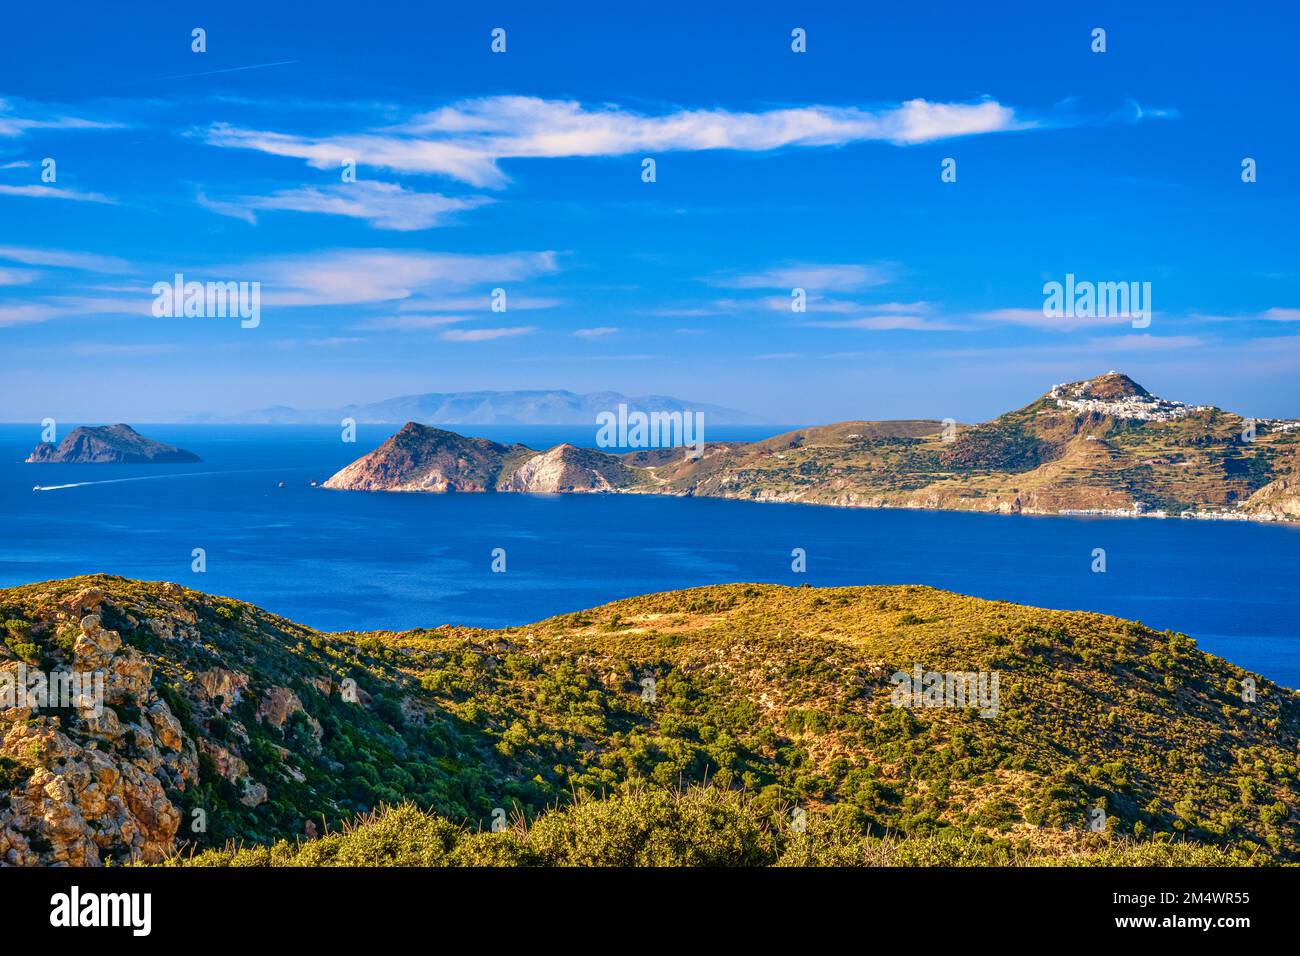 Beautiful landscape, islets in bay, rich greenery, sunny summer day, Greek island, Mediterranean sea, travel and vacation Stock Photo